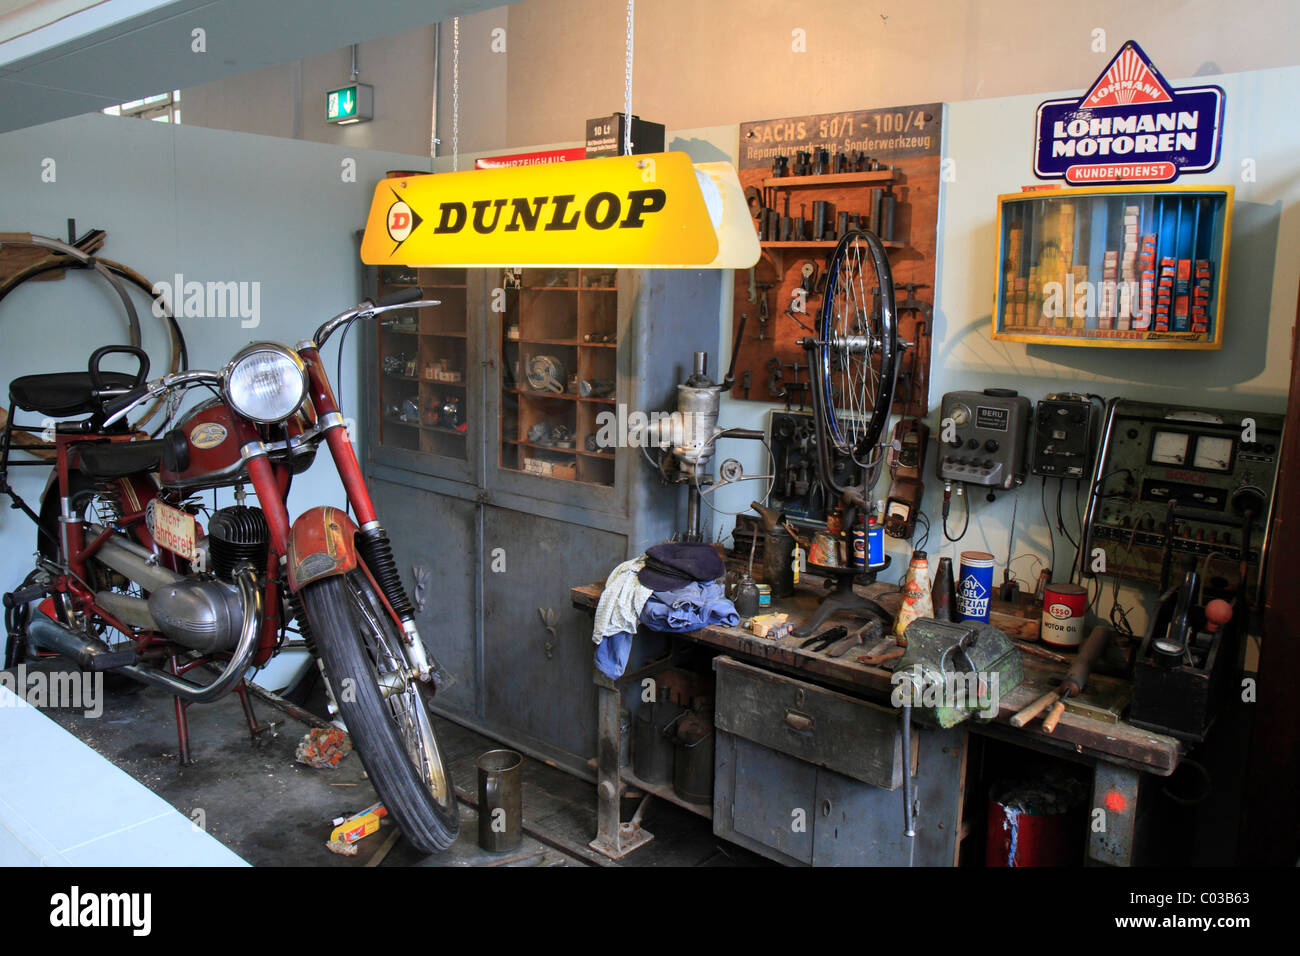 Historic motorcycle workshop, Dunlop neon sign, ErfinderZeiten: Auto- und Uhrenmuseum, Time of Innovators: Museum of Cars and Stock Photo